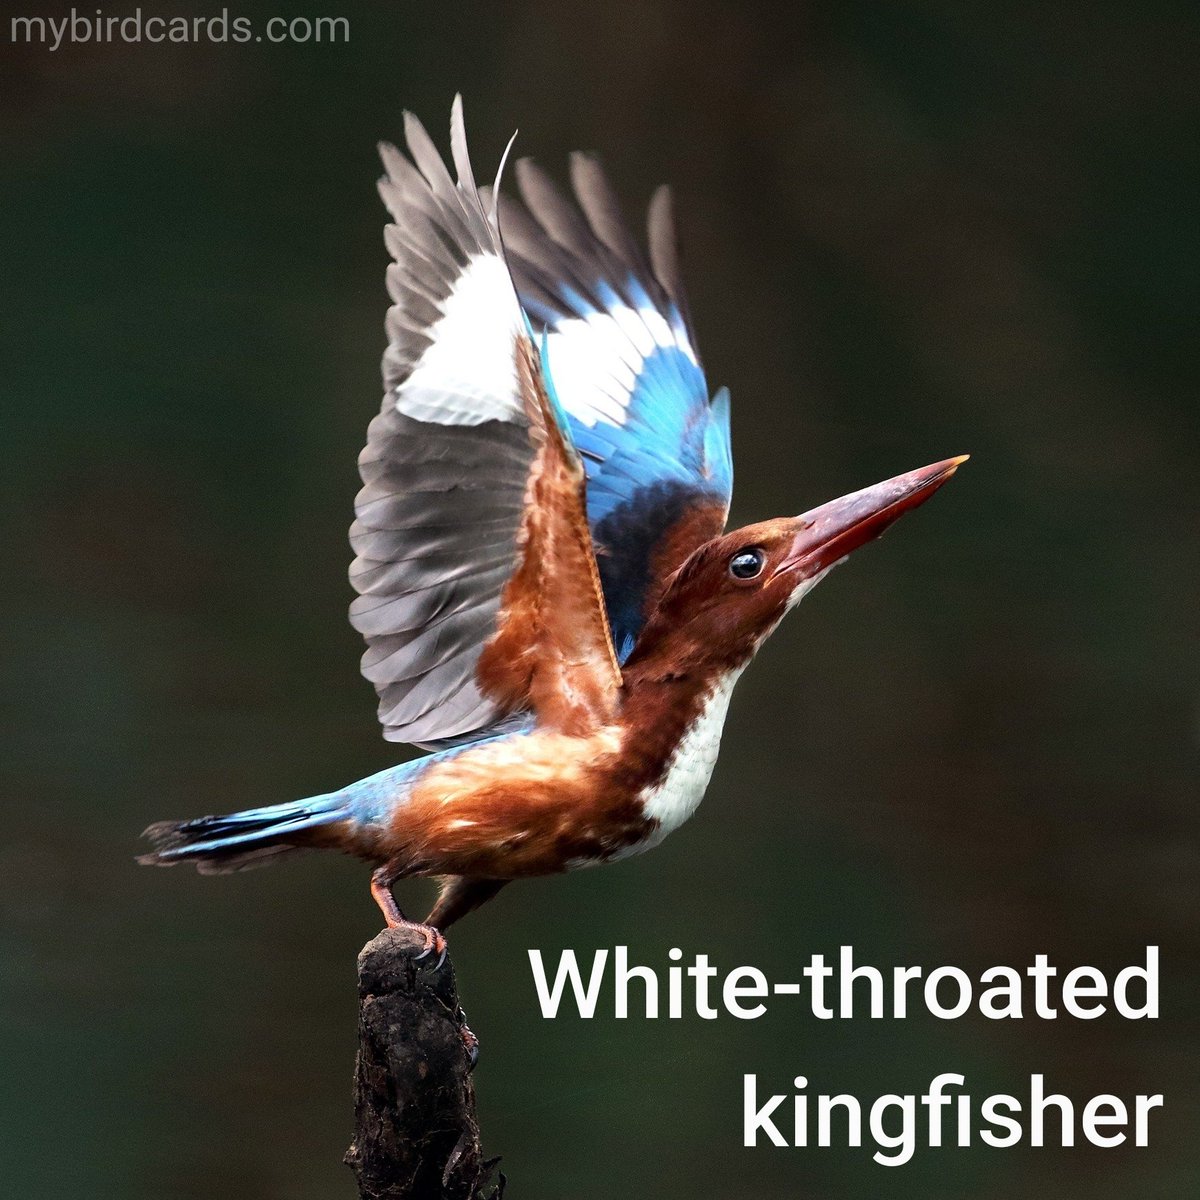 🌏 White-throated kingfisher (Halcyon smyrnensis) #Asianbirds | #mybirdcards #birdcards #birds🦜 #BirdsOfTwitter #birds